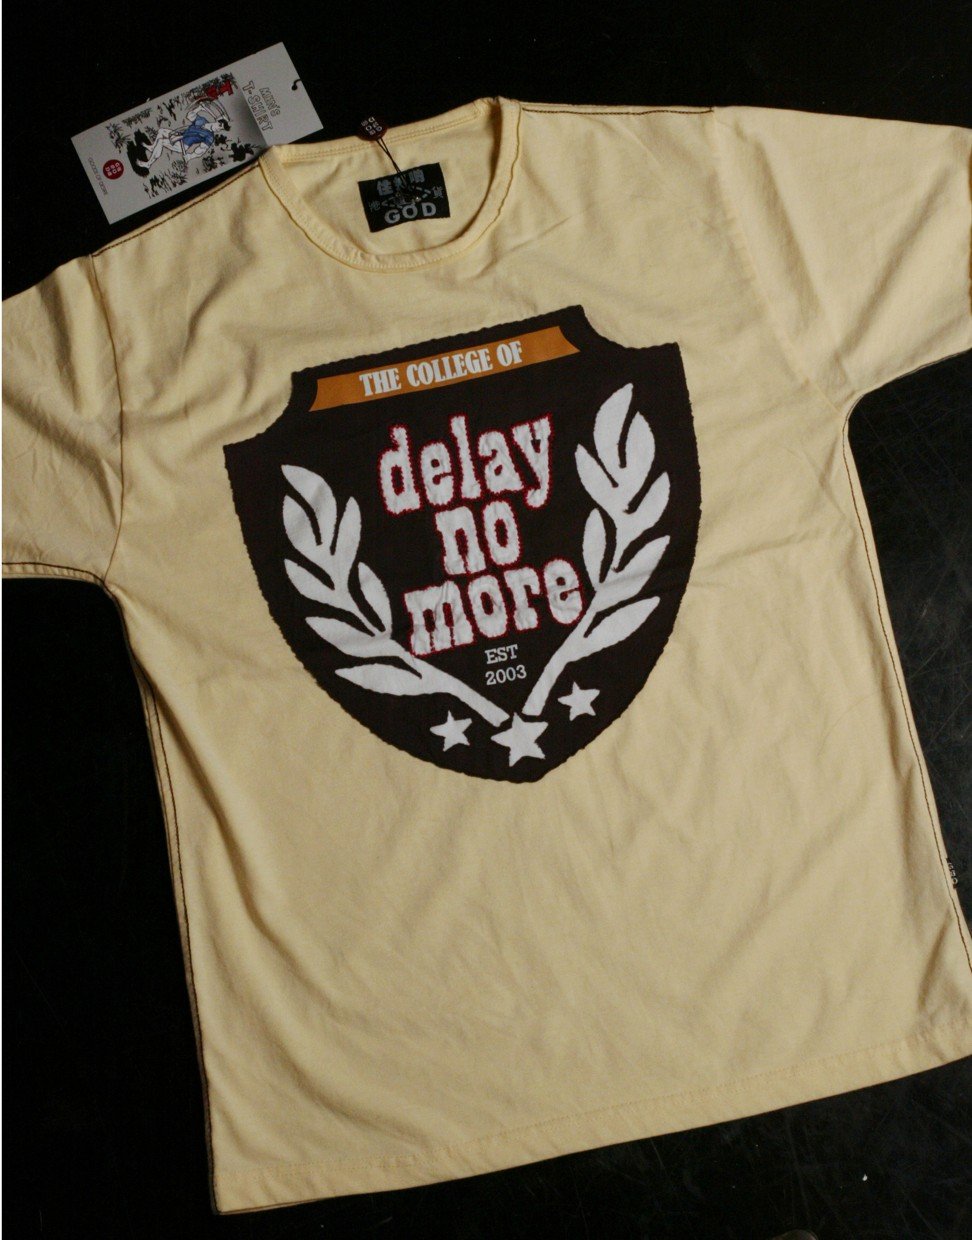 G.O.D. T-shirt displaying the iconic ‘Delay No More’ text. Photo: Edmond So